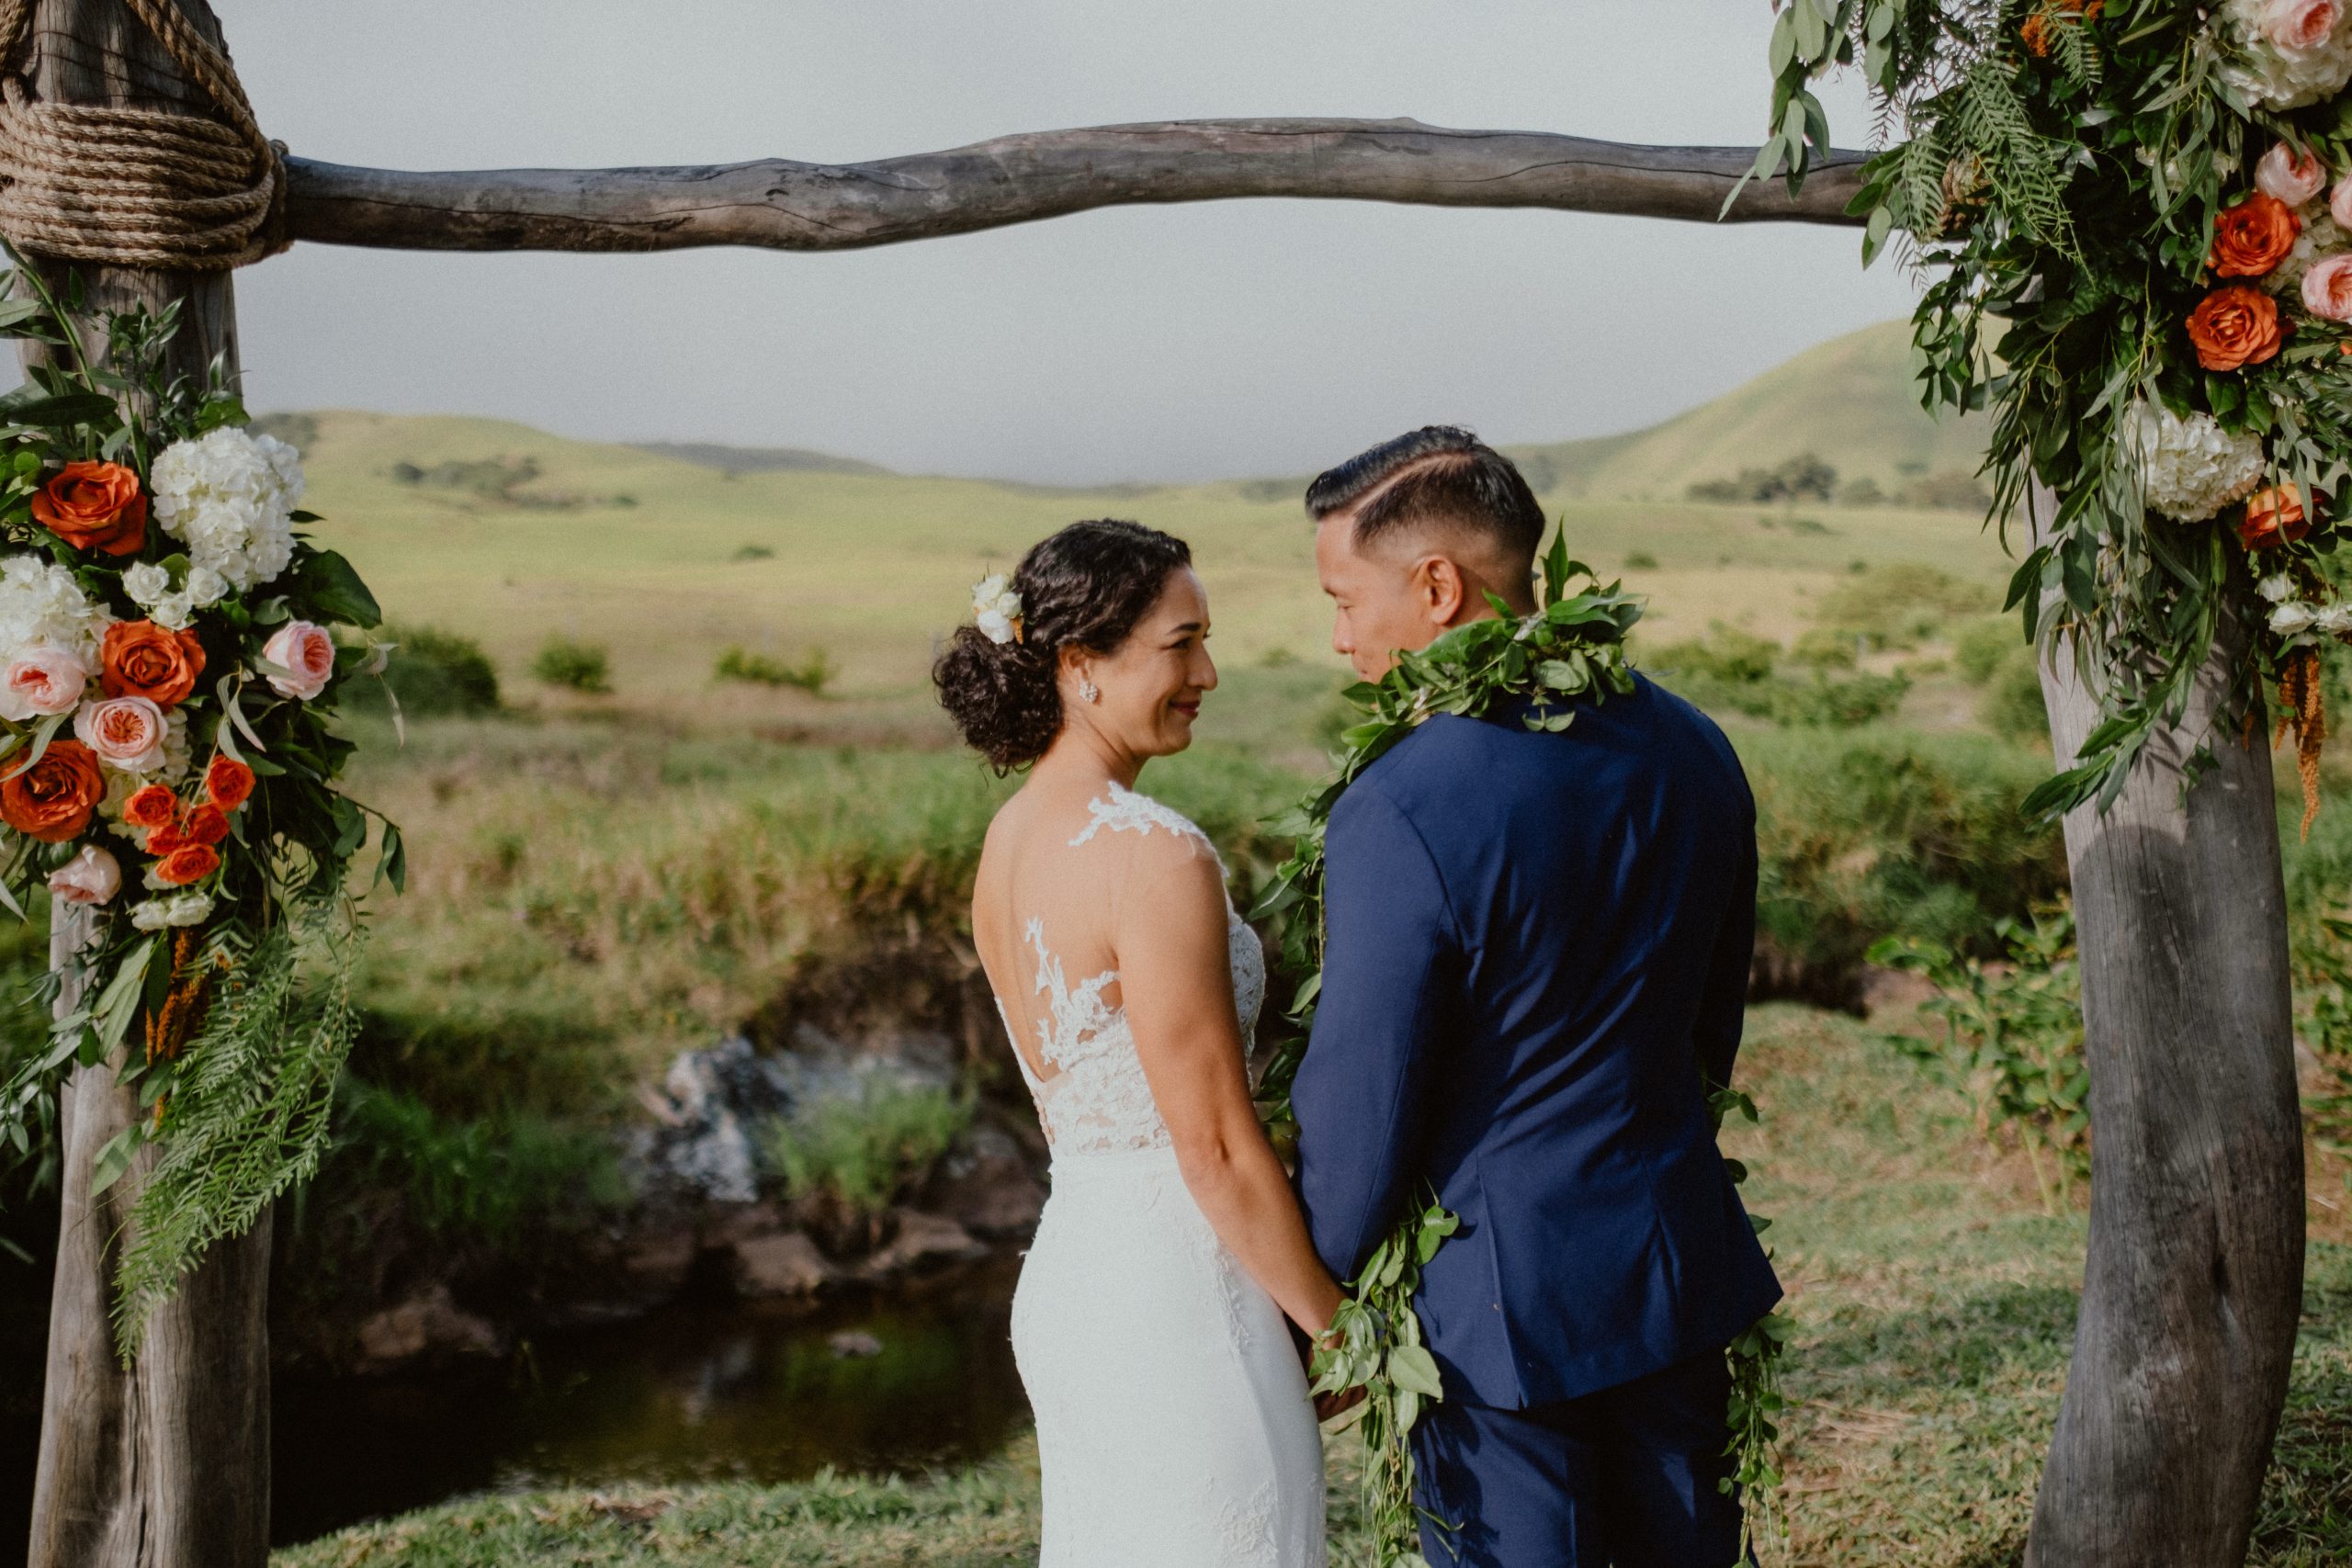 Bride and groom photography of Big Island Fall wedding day of bride with lace wedding dress and bridal style with groom in dark blue suit wedding style | Big Island Elopement, Hawaii Elopement Photographer, Hawaii Elopement and Wedding Inspiration, Hawaii Elopement ideas, Big Island Wedding Inspiration, Fall Hawaiian Wedding Ideas, Fall Wedding Inspiration, Hawaii Outdoor Wedding Ideas | chelseaabril.com